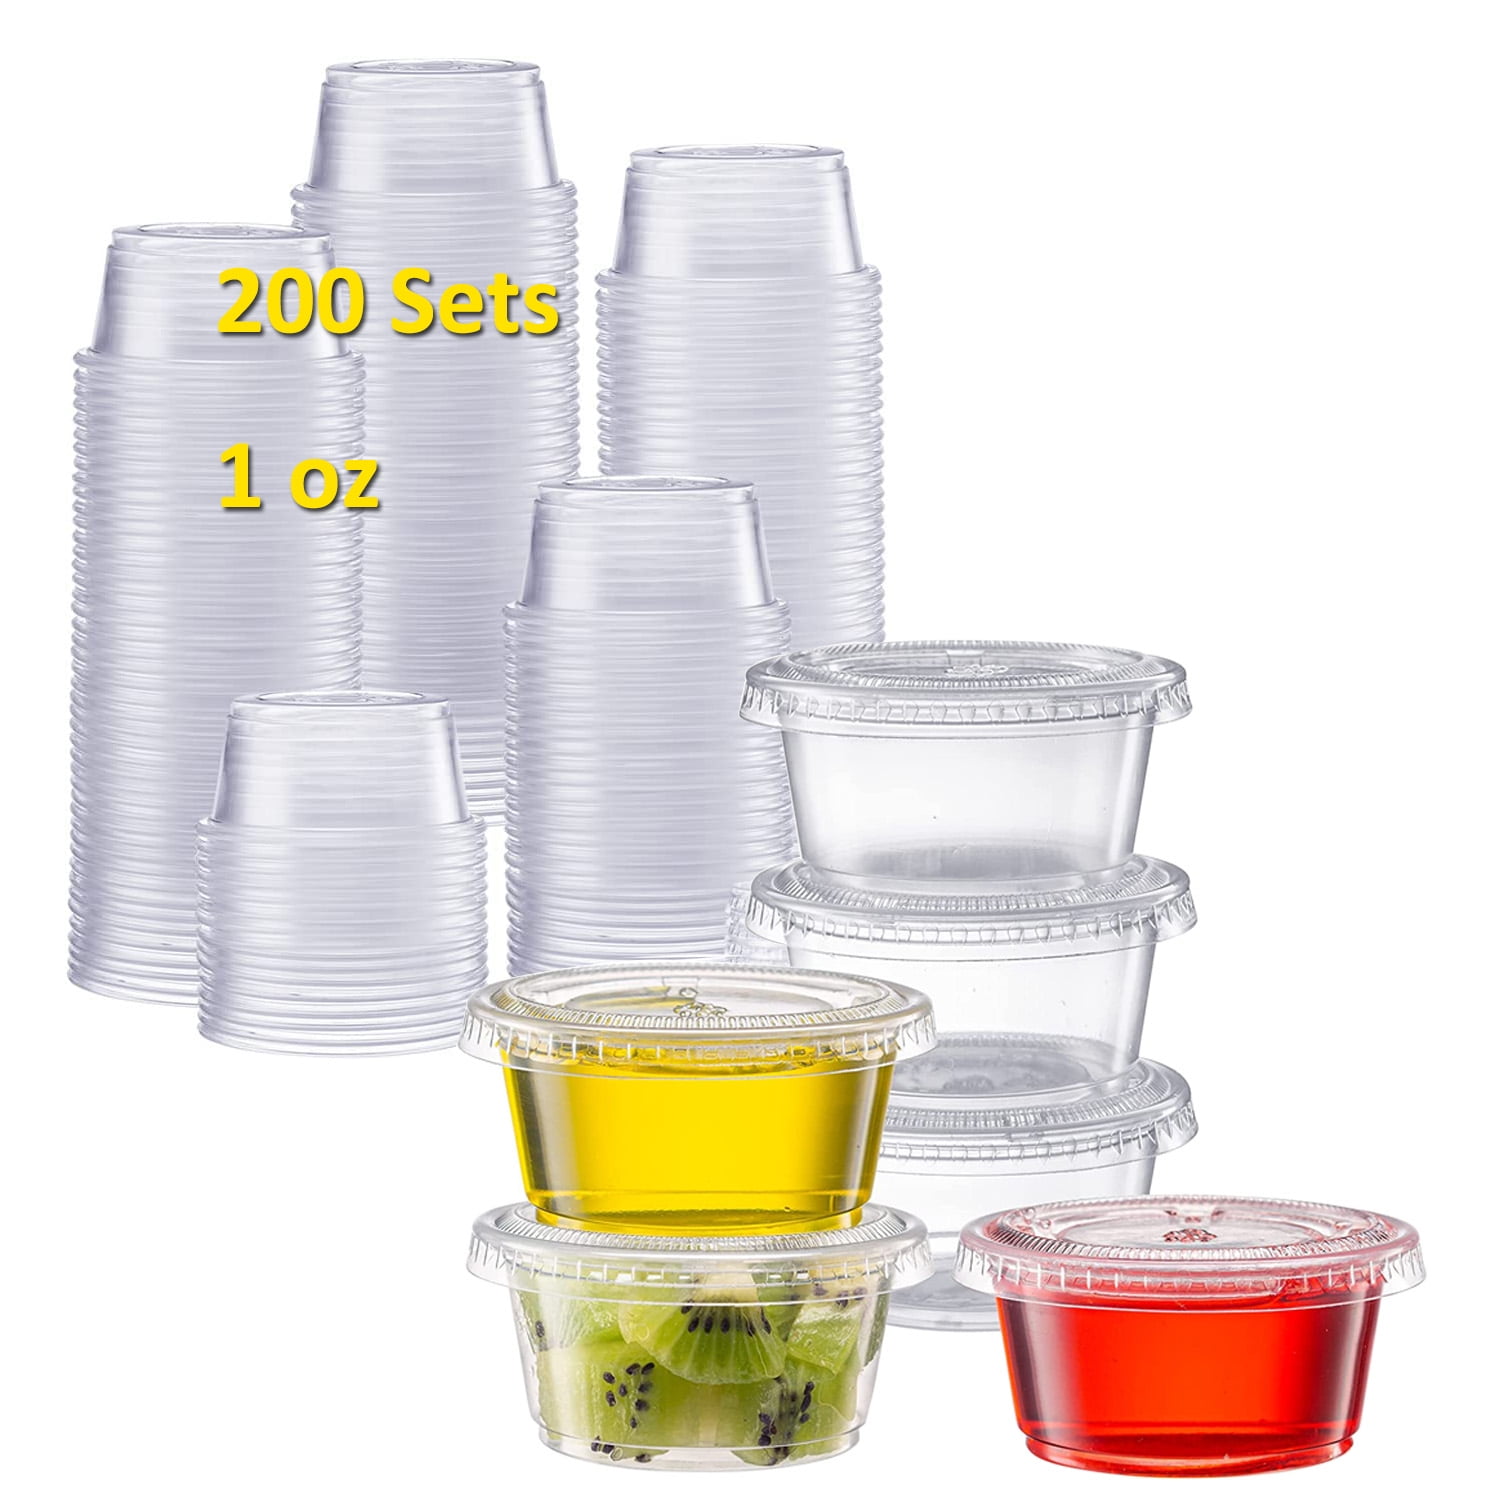 130 Sets - 2 Oz Jello Shot Cups, Small Plastic Containers with Lids,  Airtight and Stackable Portion Cups, Salad Dressing Container, Dipping  Sauce Cups, Condiment Cups for Lunch, Party to Go, Trips 2oz - 130